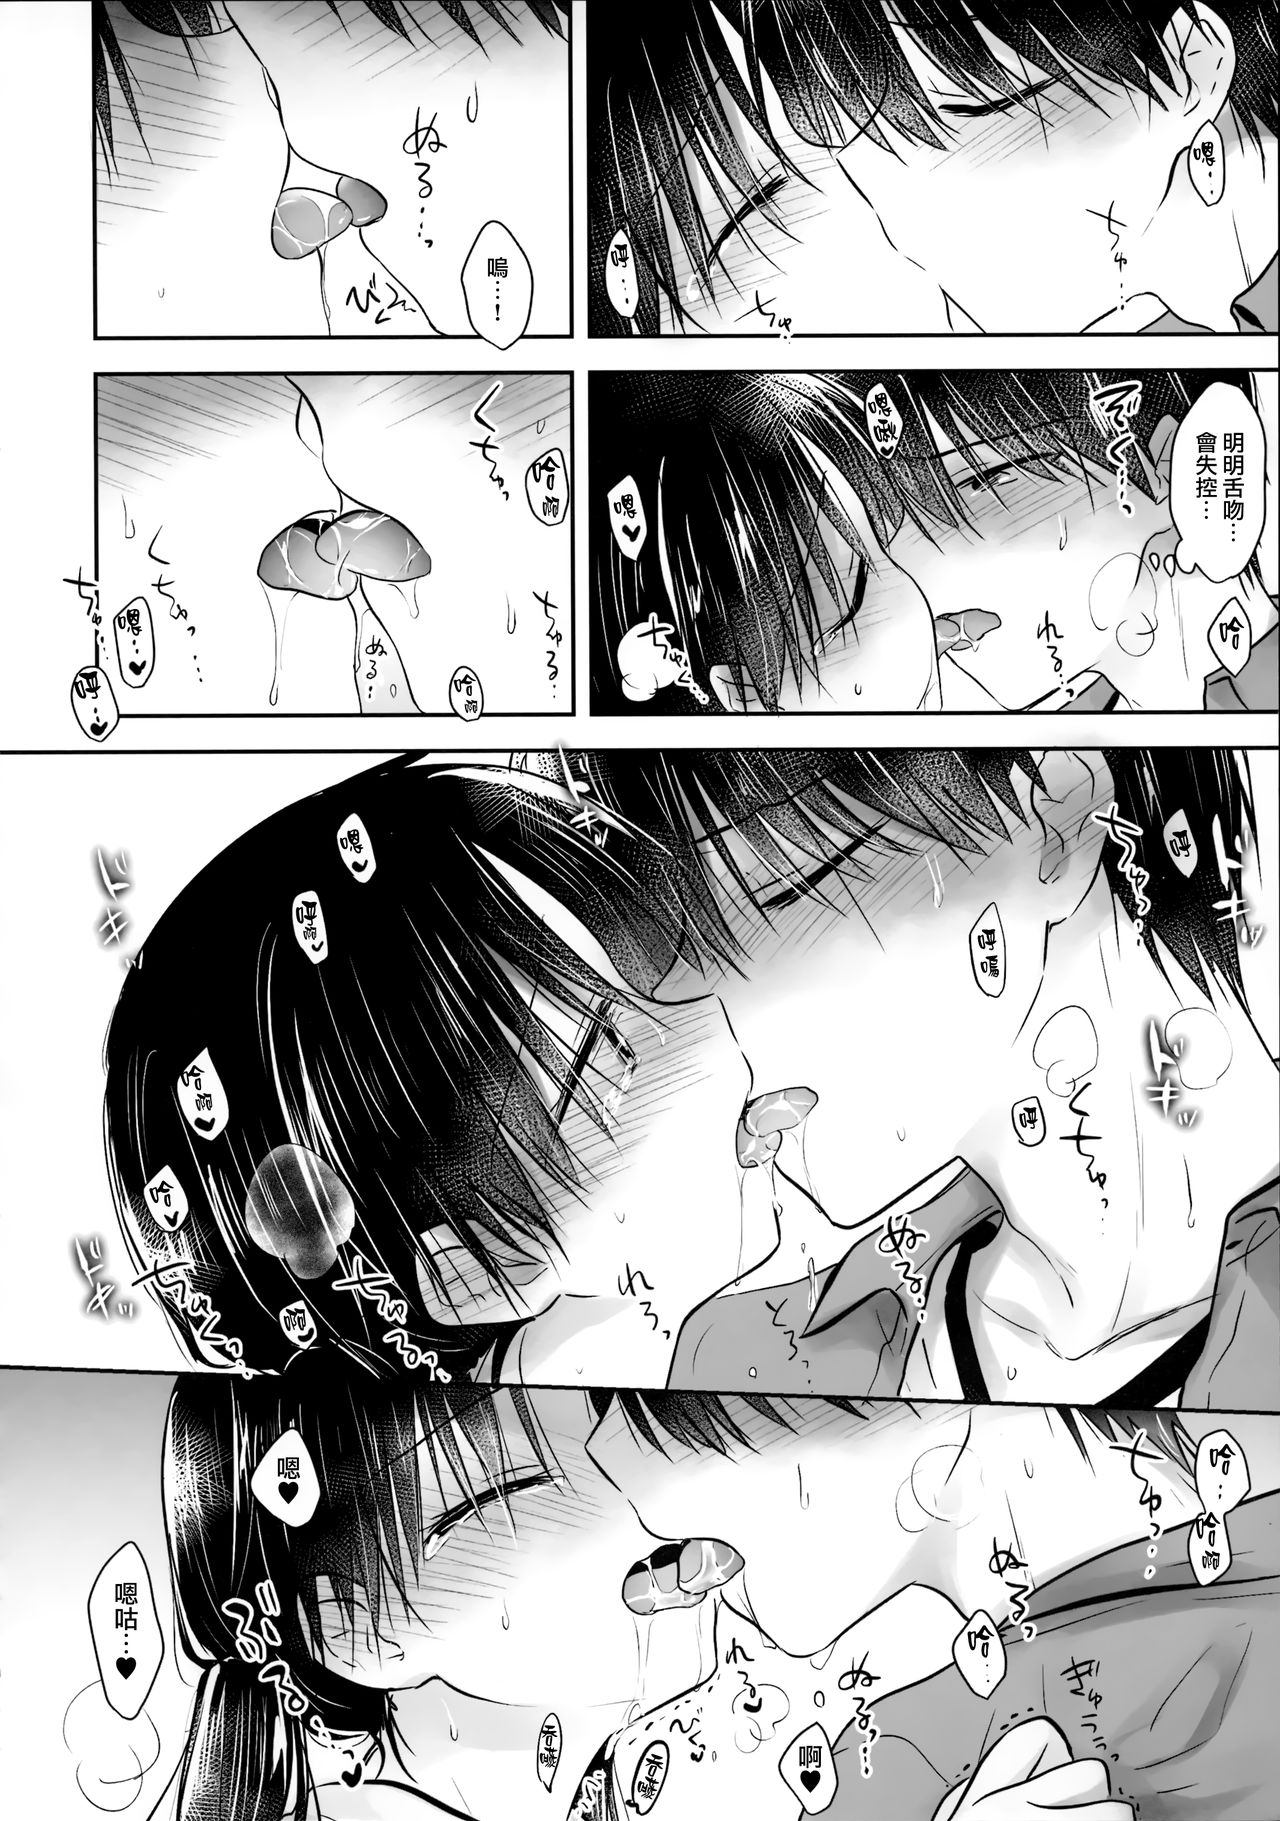 (C96) [Aquadrop (Mikami Mika)] Omoide Sex [Chinese] [山樱汉化] page 27 full